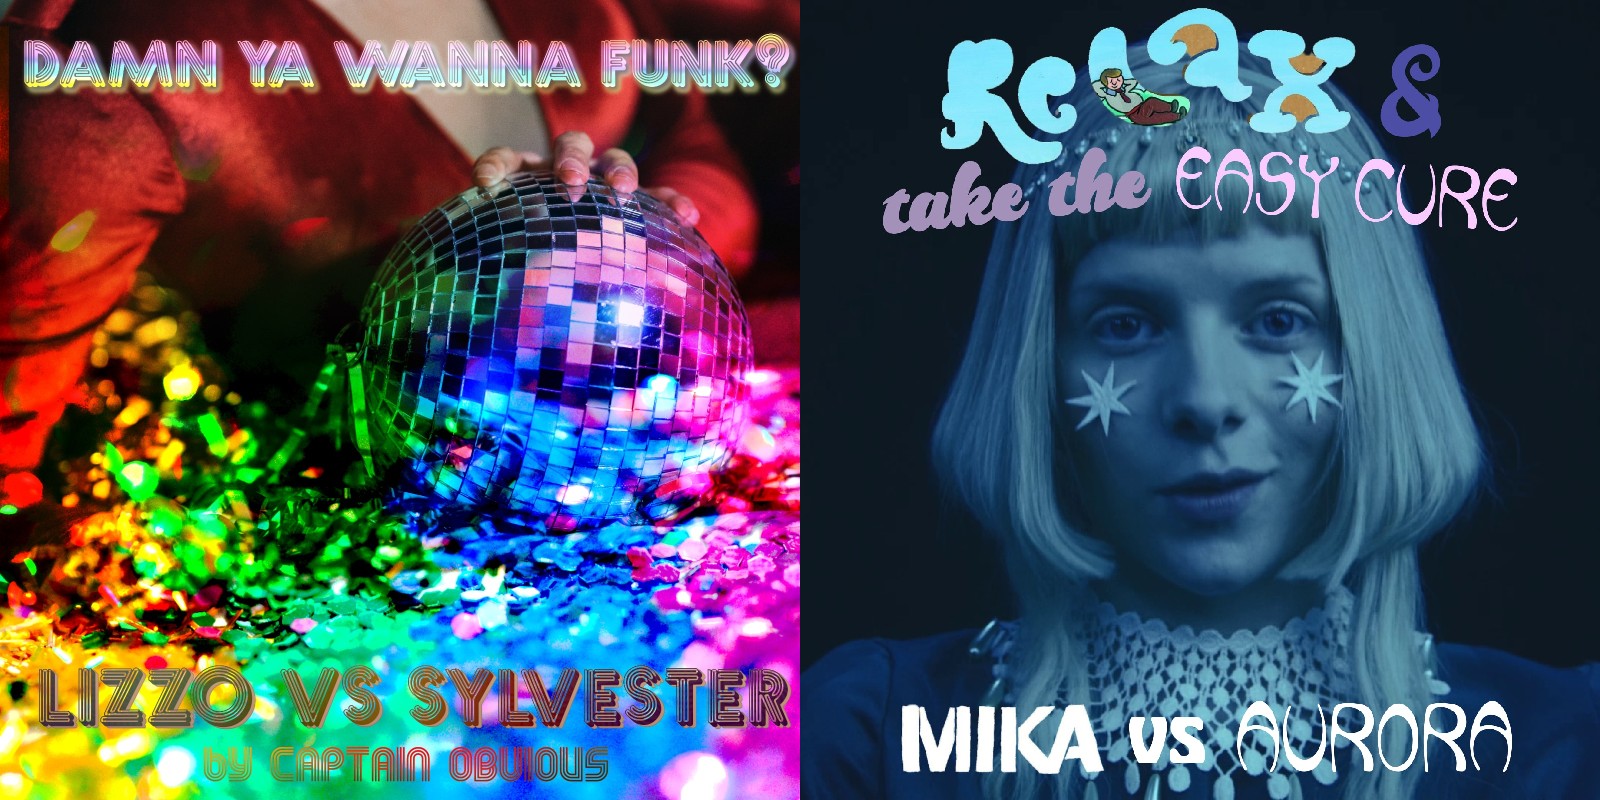 Instamatic Relax And Take The Easy Cure (Aurora vs MIKA) About Damn Punk (Lizzo vs Daft Punk) aka About Damn Time To Lose Yourself To Dance) Captain Obvious Damn Ya Wanna Funk (Lizzo vs Patrick Cowley Featuring Sylvester) mashup cover bootleg boot